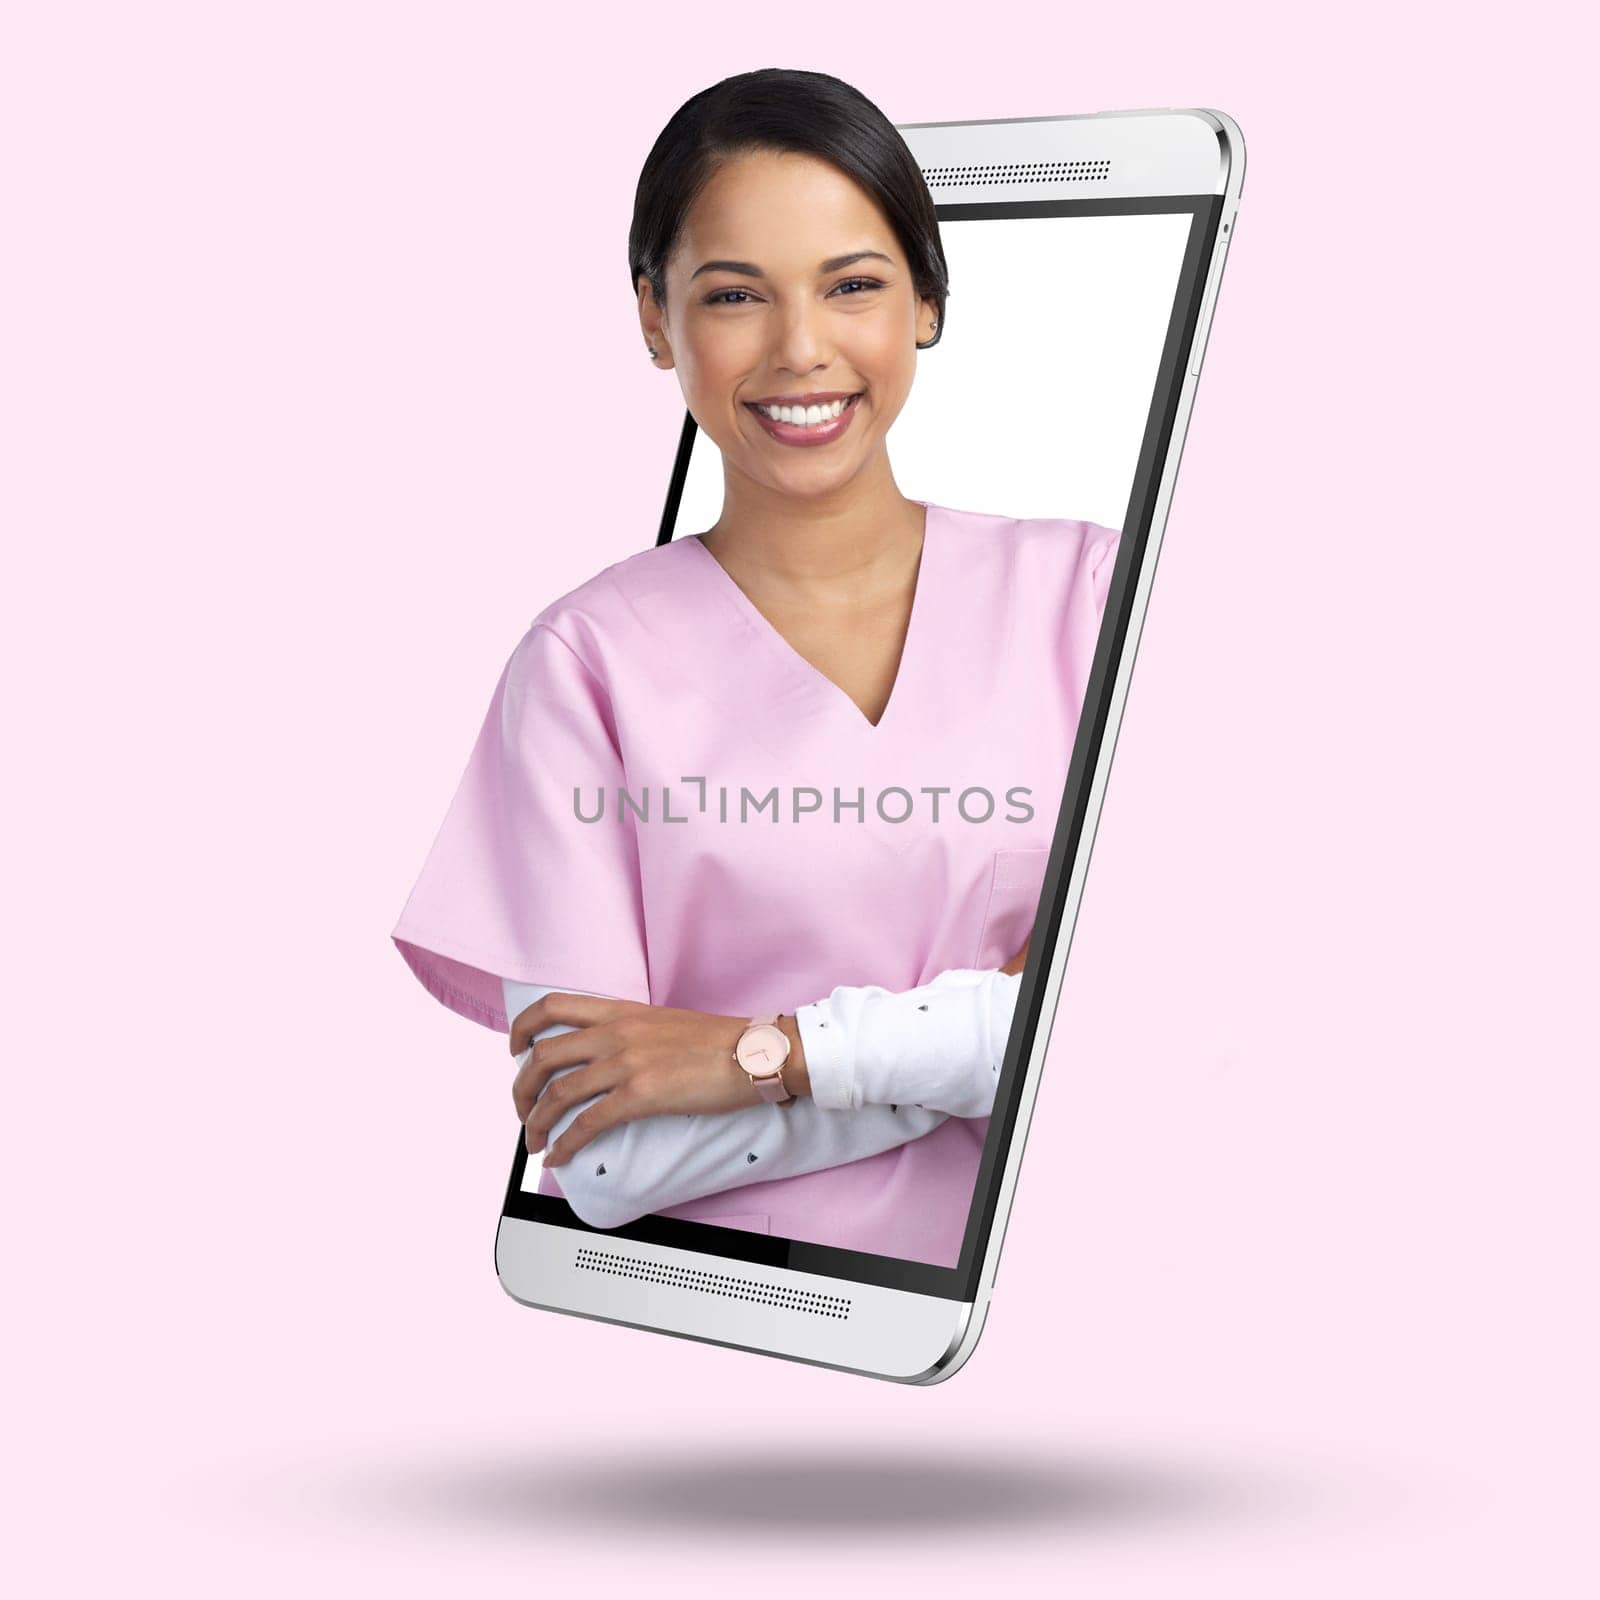 3d telehealth nurse, phone and online with screen, portrait and happy for app by pink background. Medic woman, face or smile for healthcare, advice or communication on internet for wellness service.